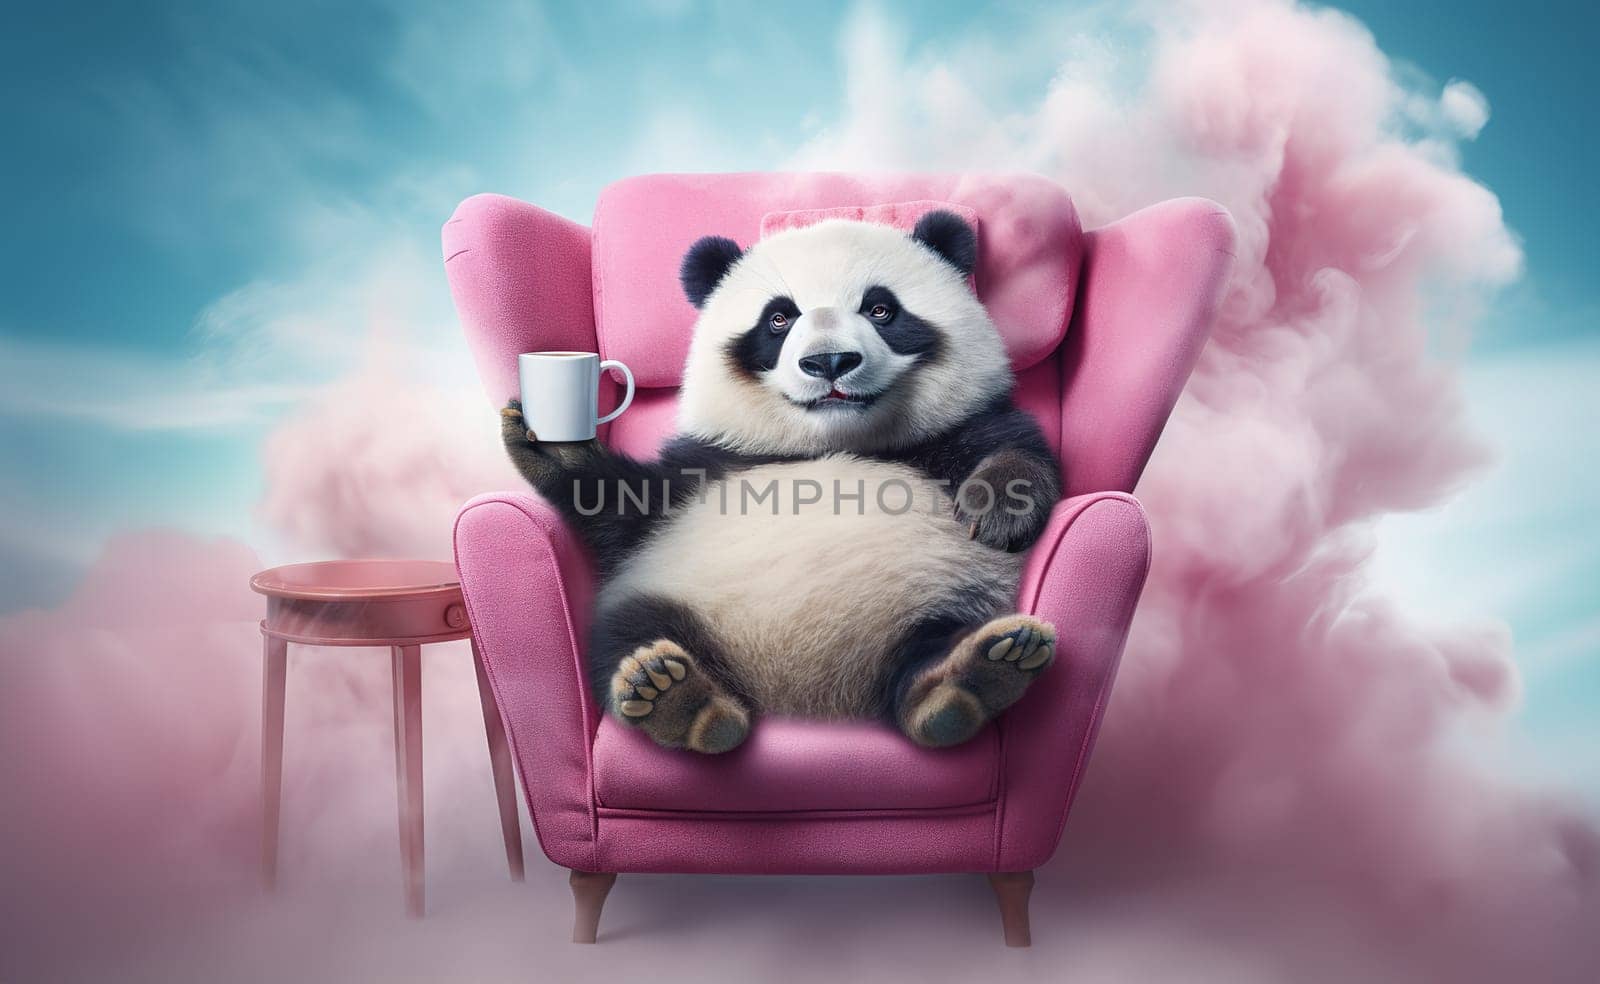 cheerful fluffy cute panda dreams in pink chair against blue sky with cotton candy clouds and drinks hot chocolate by KaterinaDalemans